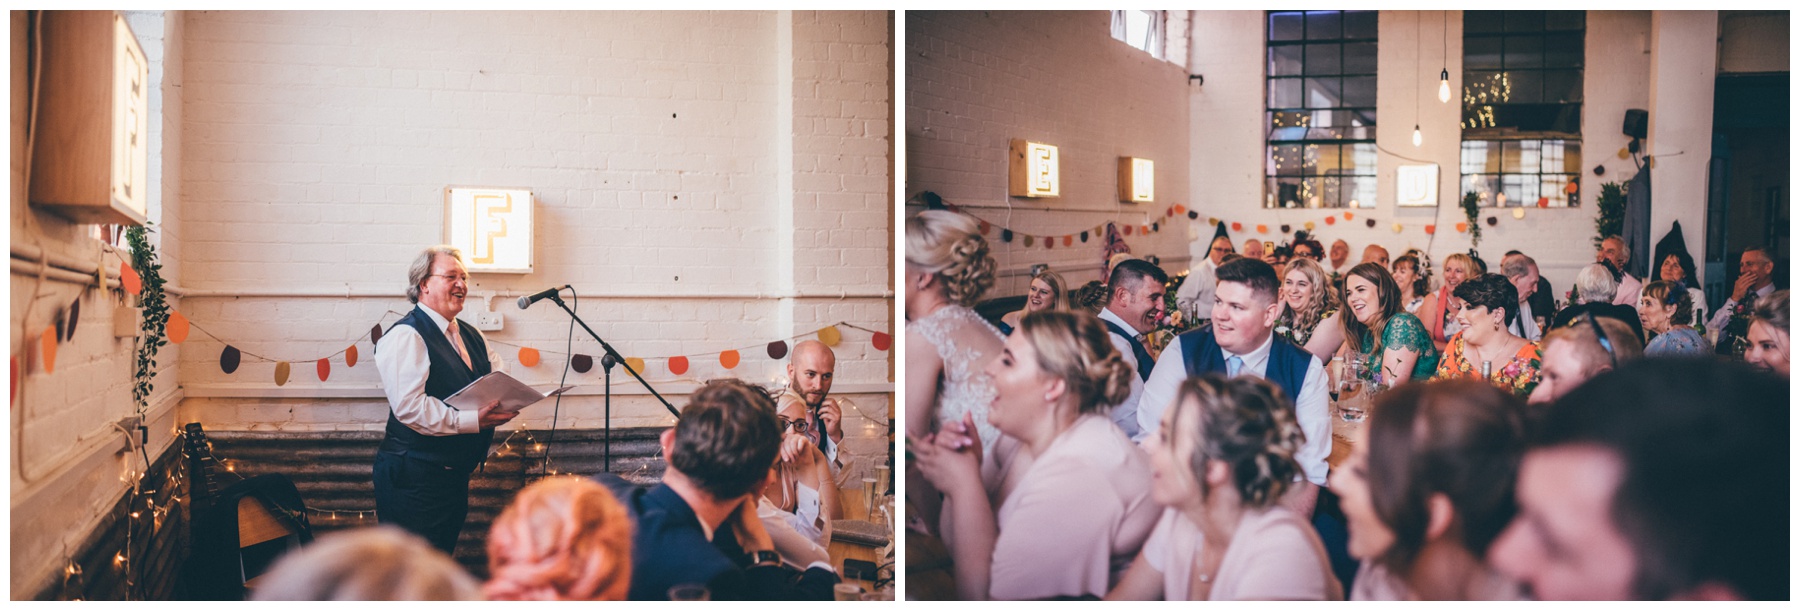 Wedding speeches at The Hide in Sheffield.